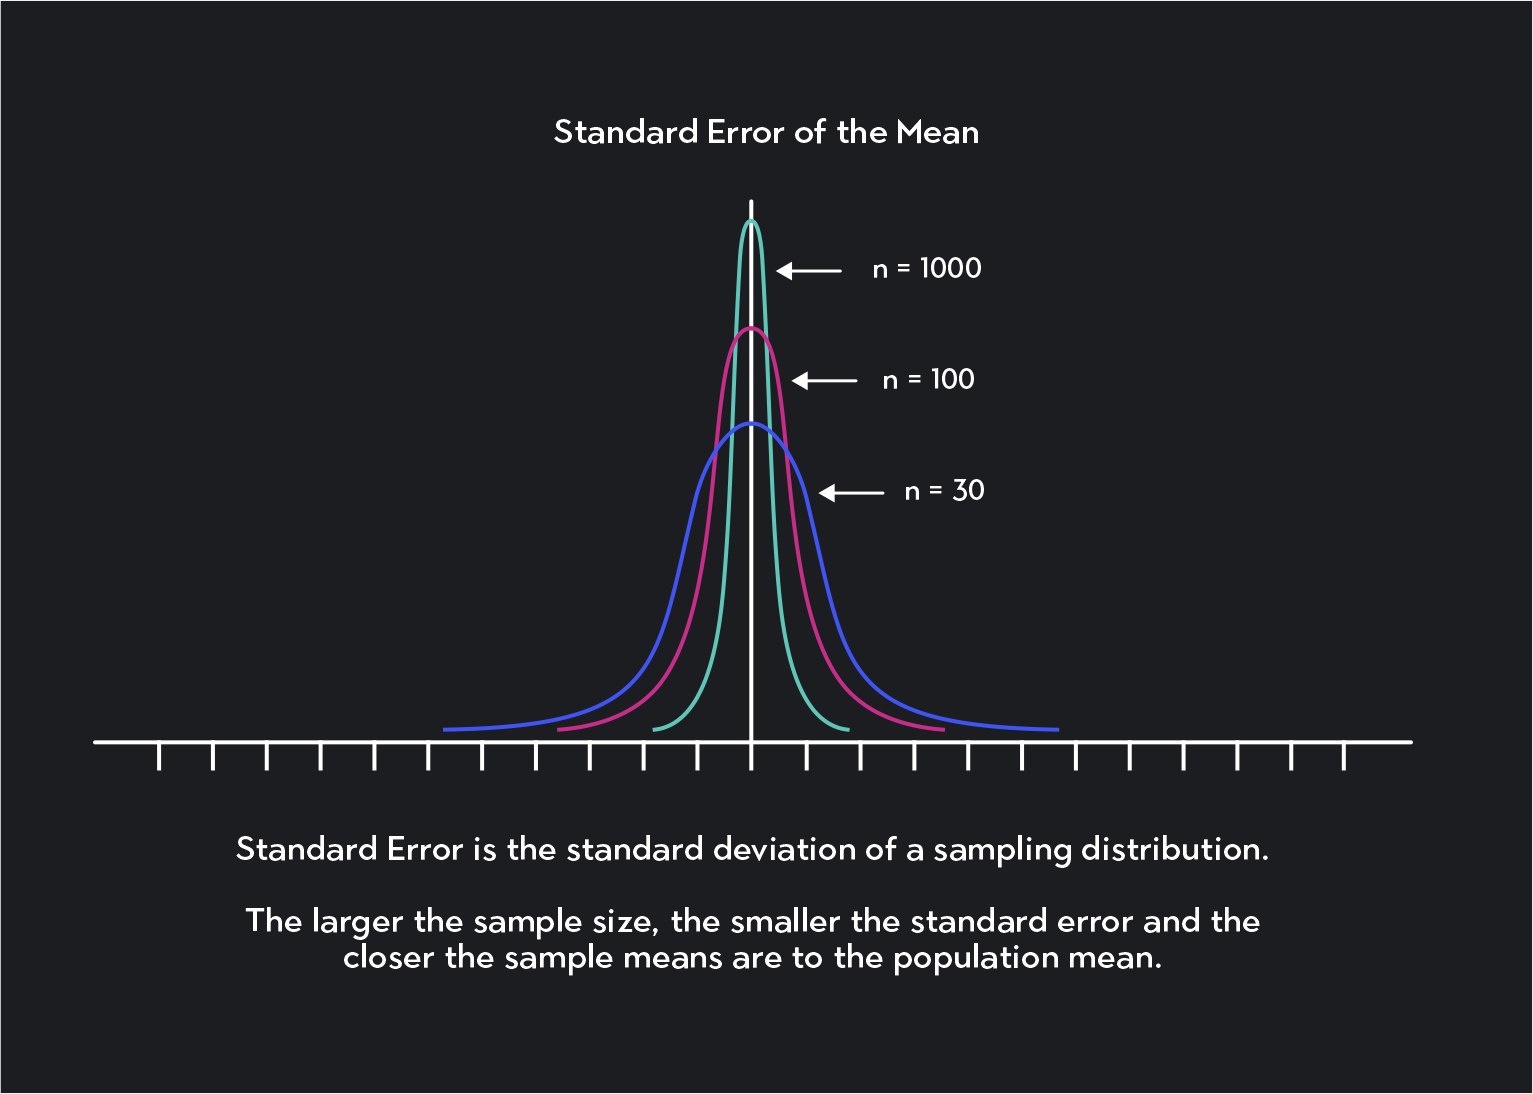 Graph showing Standard Error of the mean. The larger the sample size, the smaller the error